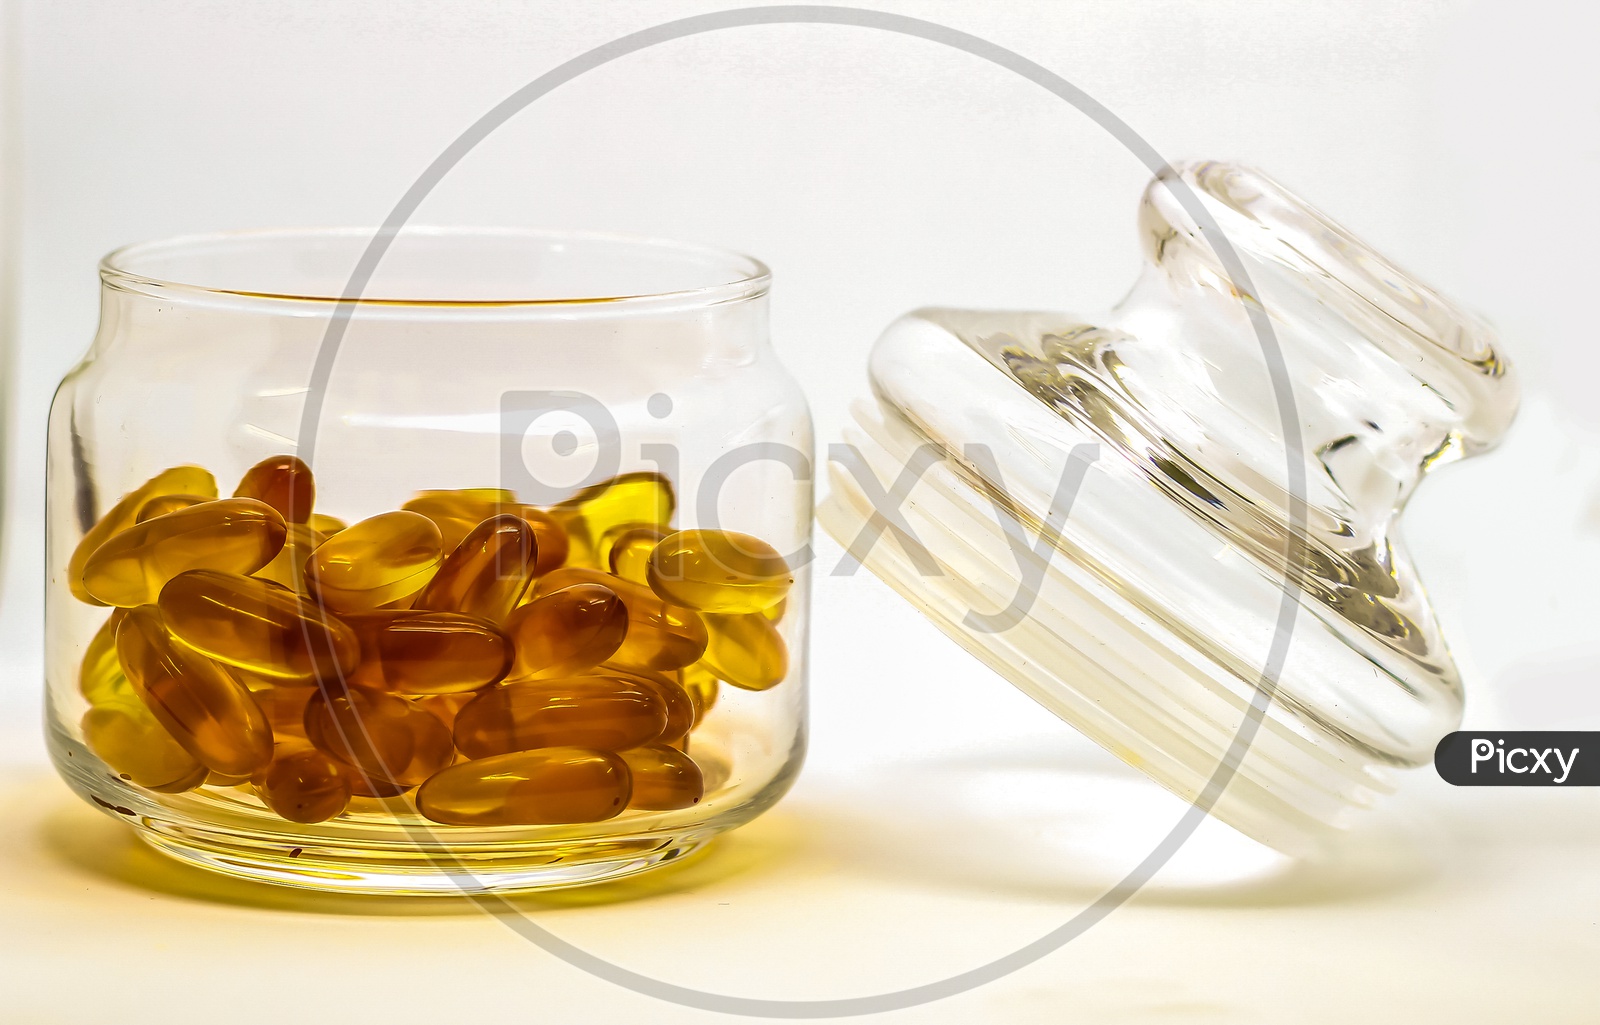 Cod Liver Oil Omega 3 Vitamin E Gel Capsules Isolated On White Background In A Transparent Glass Bottle With Glass Lid